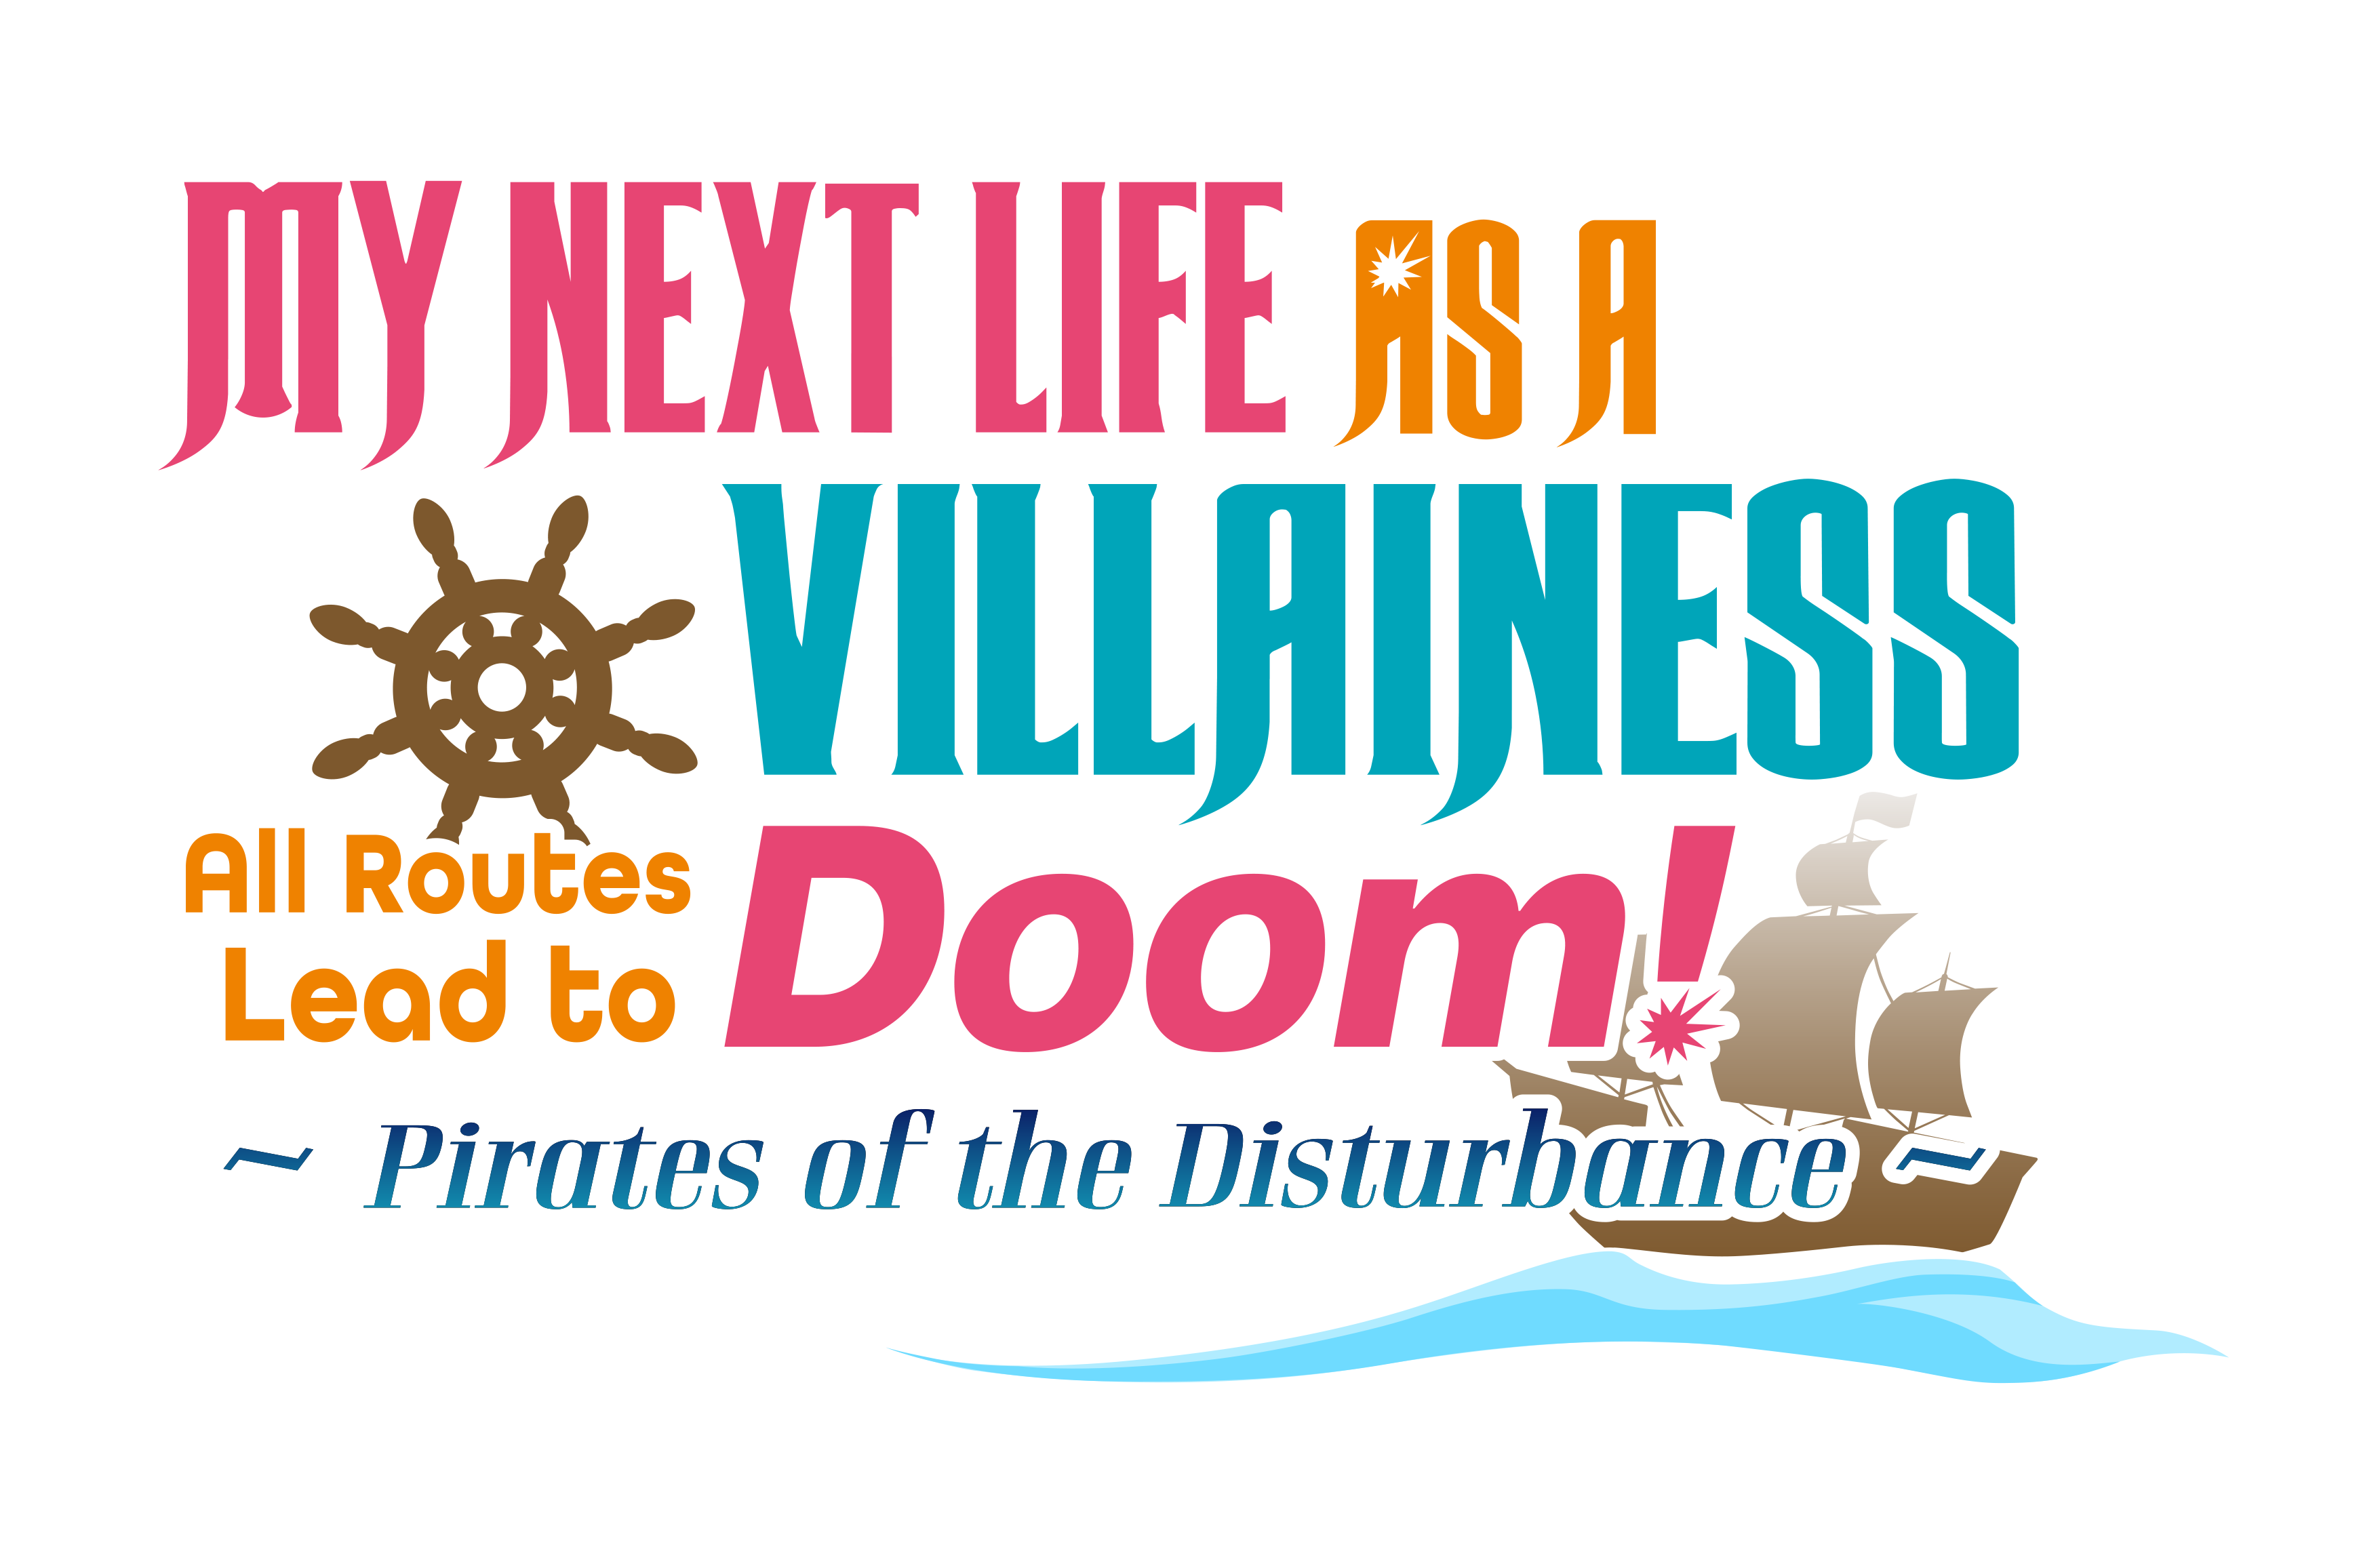 My Next Life as a Villainess: All Routes Lead to Doom new key visual : r/ anime